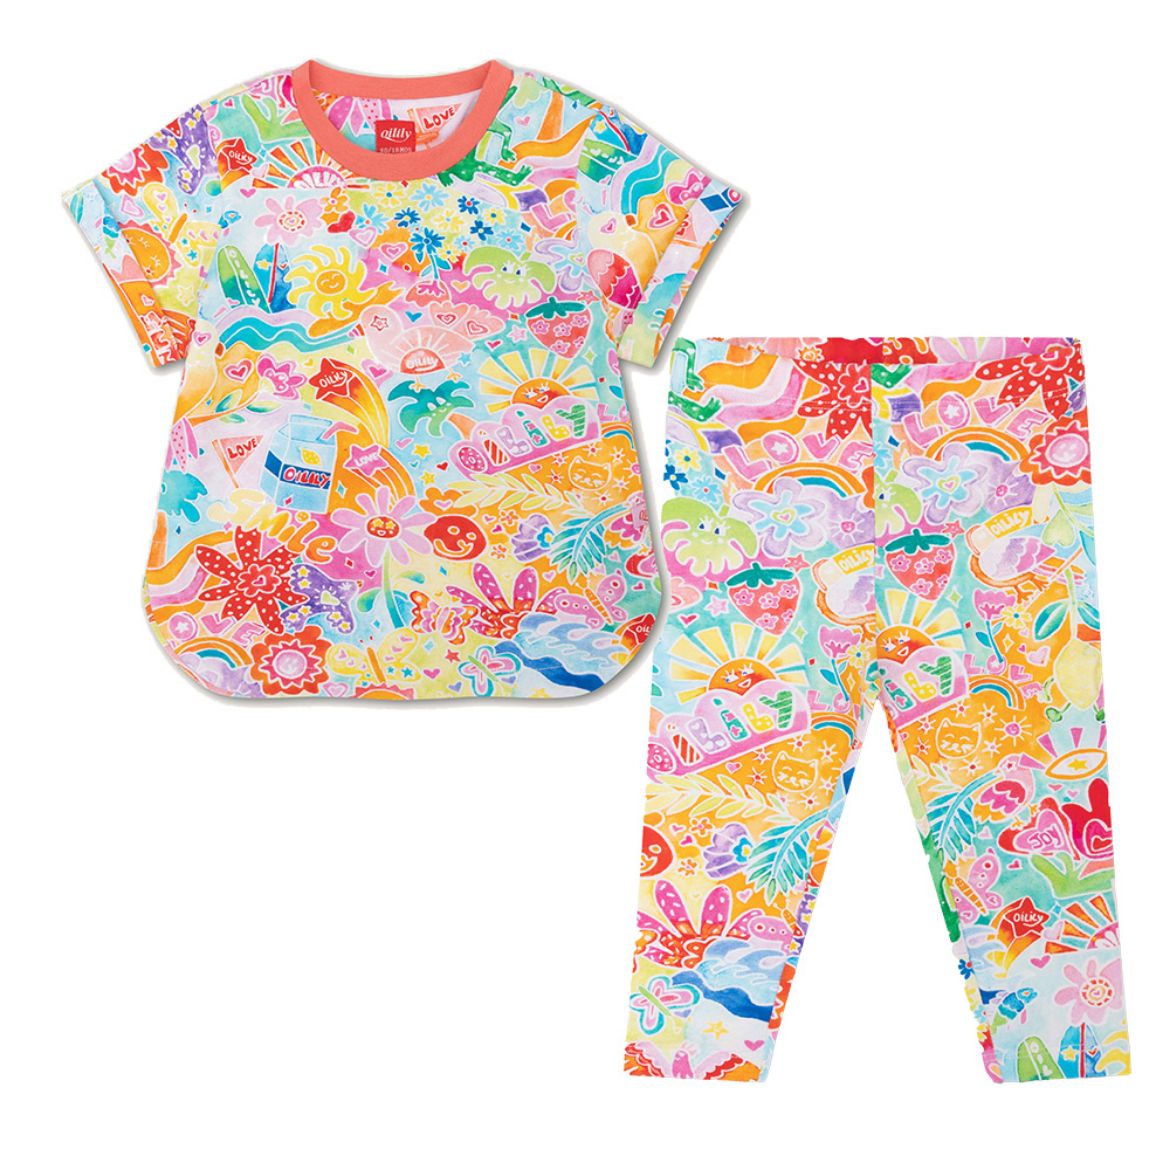 Picture of Oilily Girls Terriffic T-Shirt & Peppy Sun Printed Leggings Set